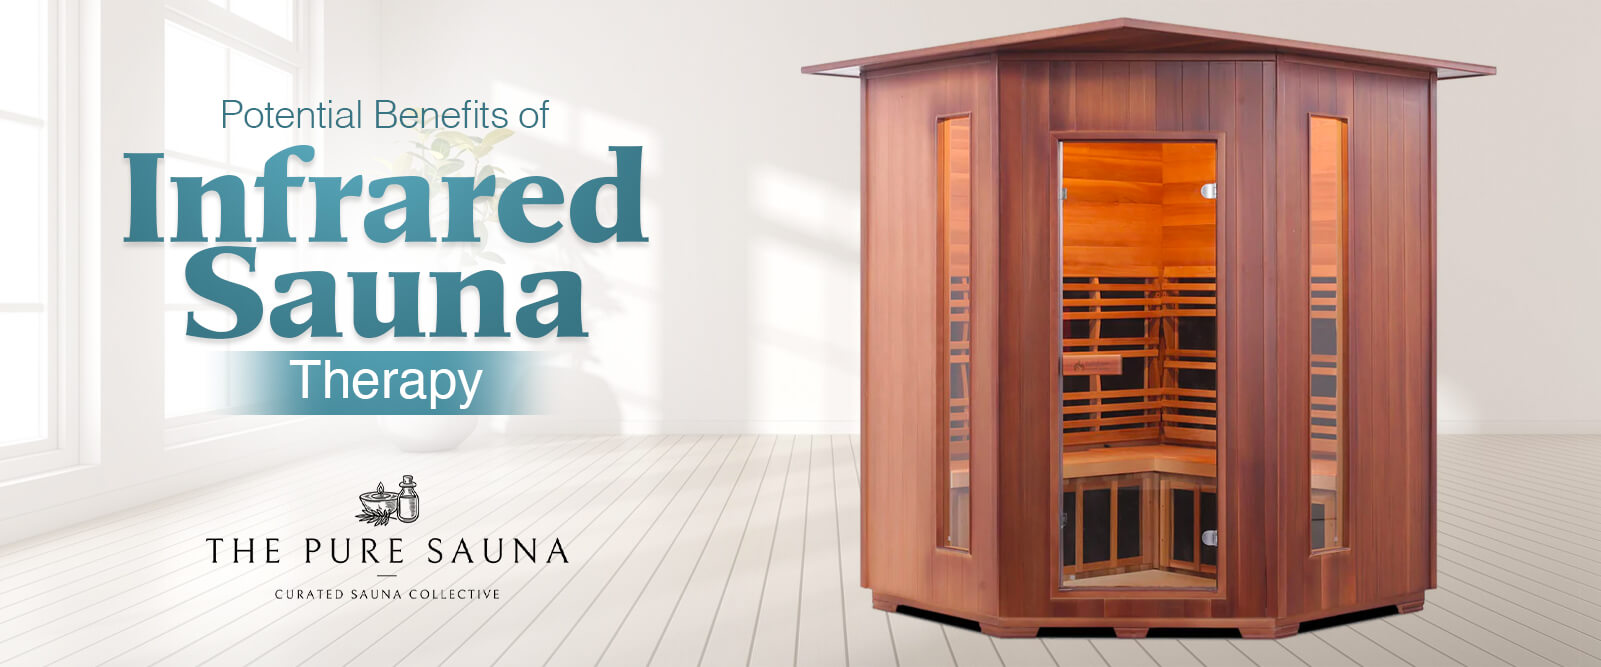 Benefits of Infrared Sauna Therapy